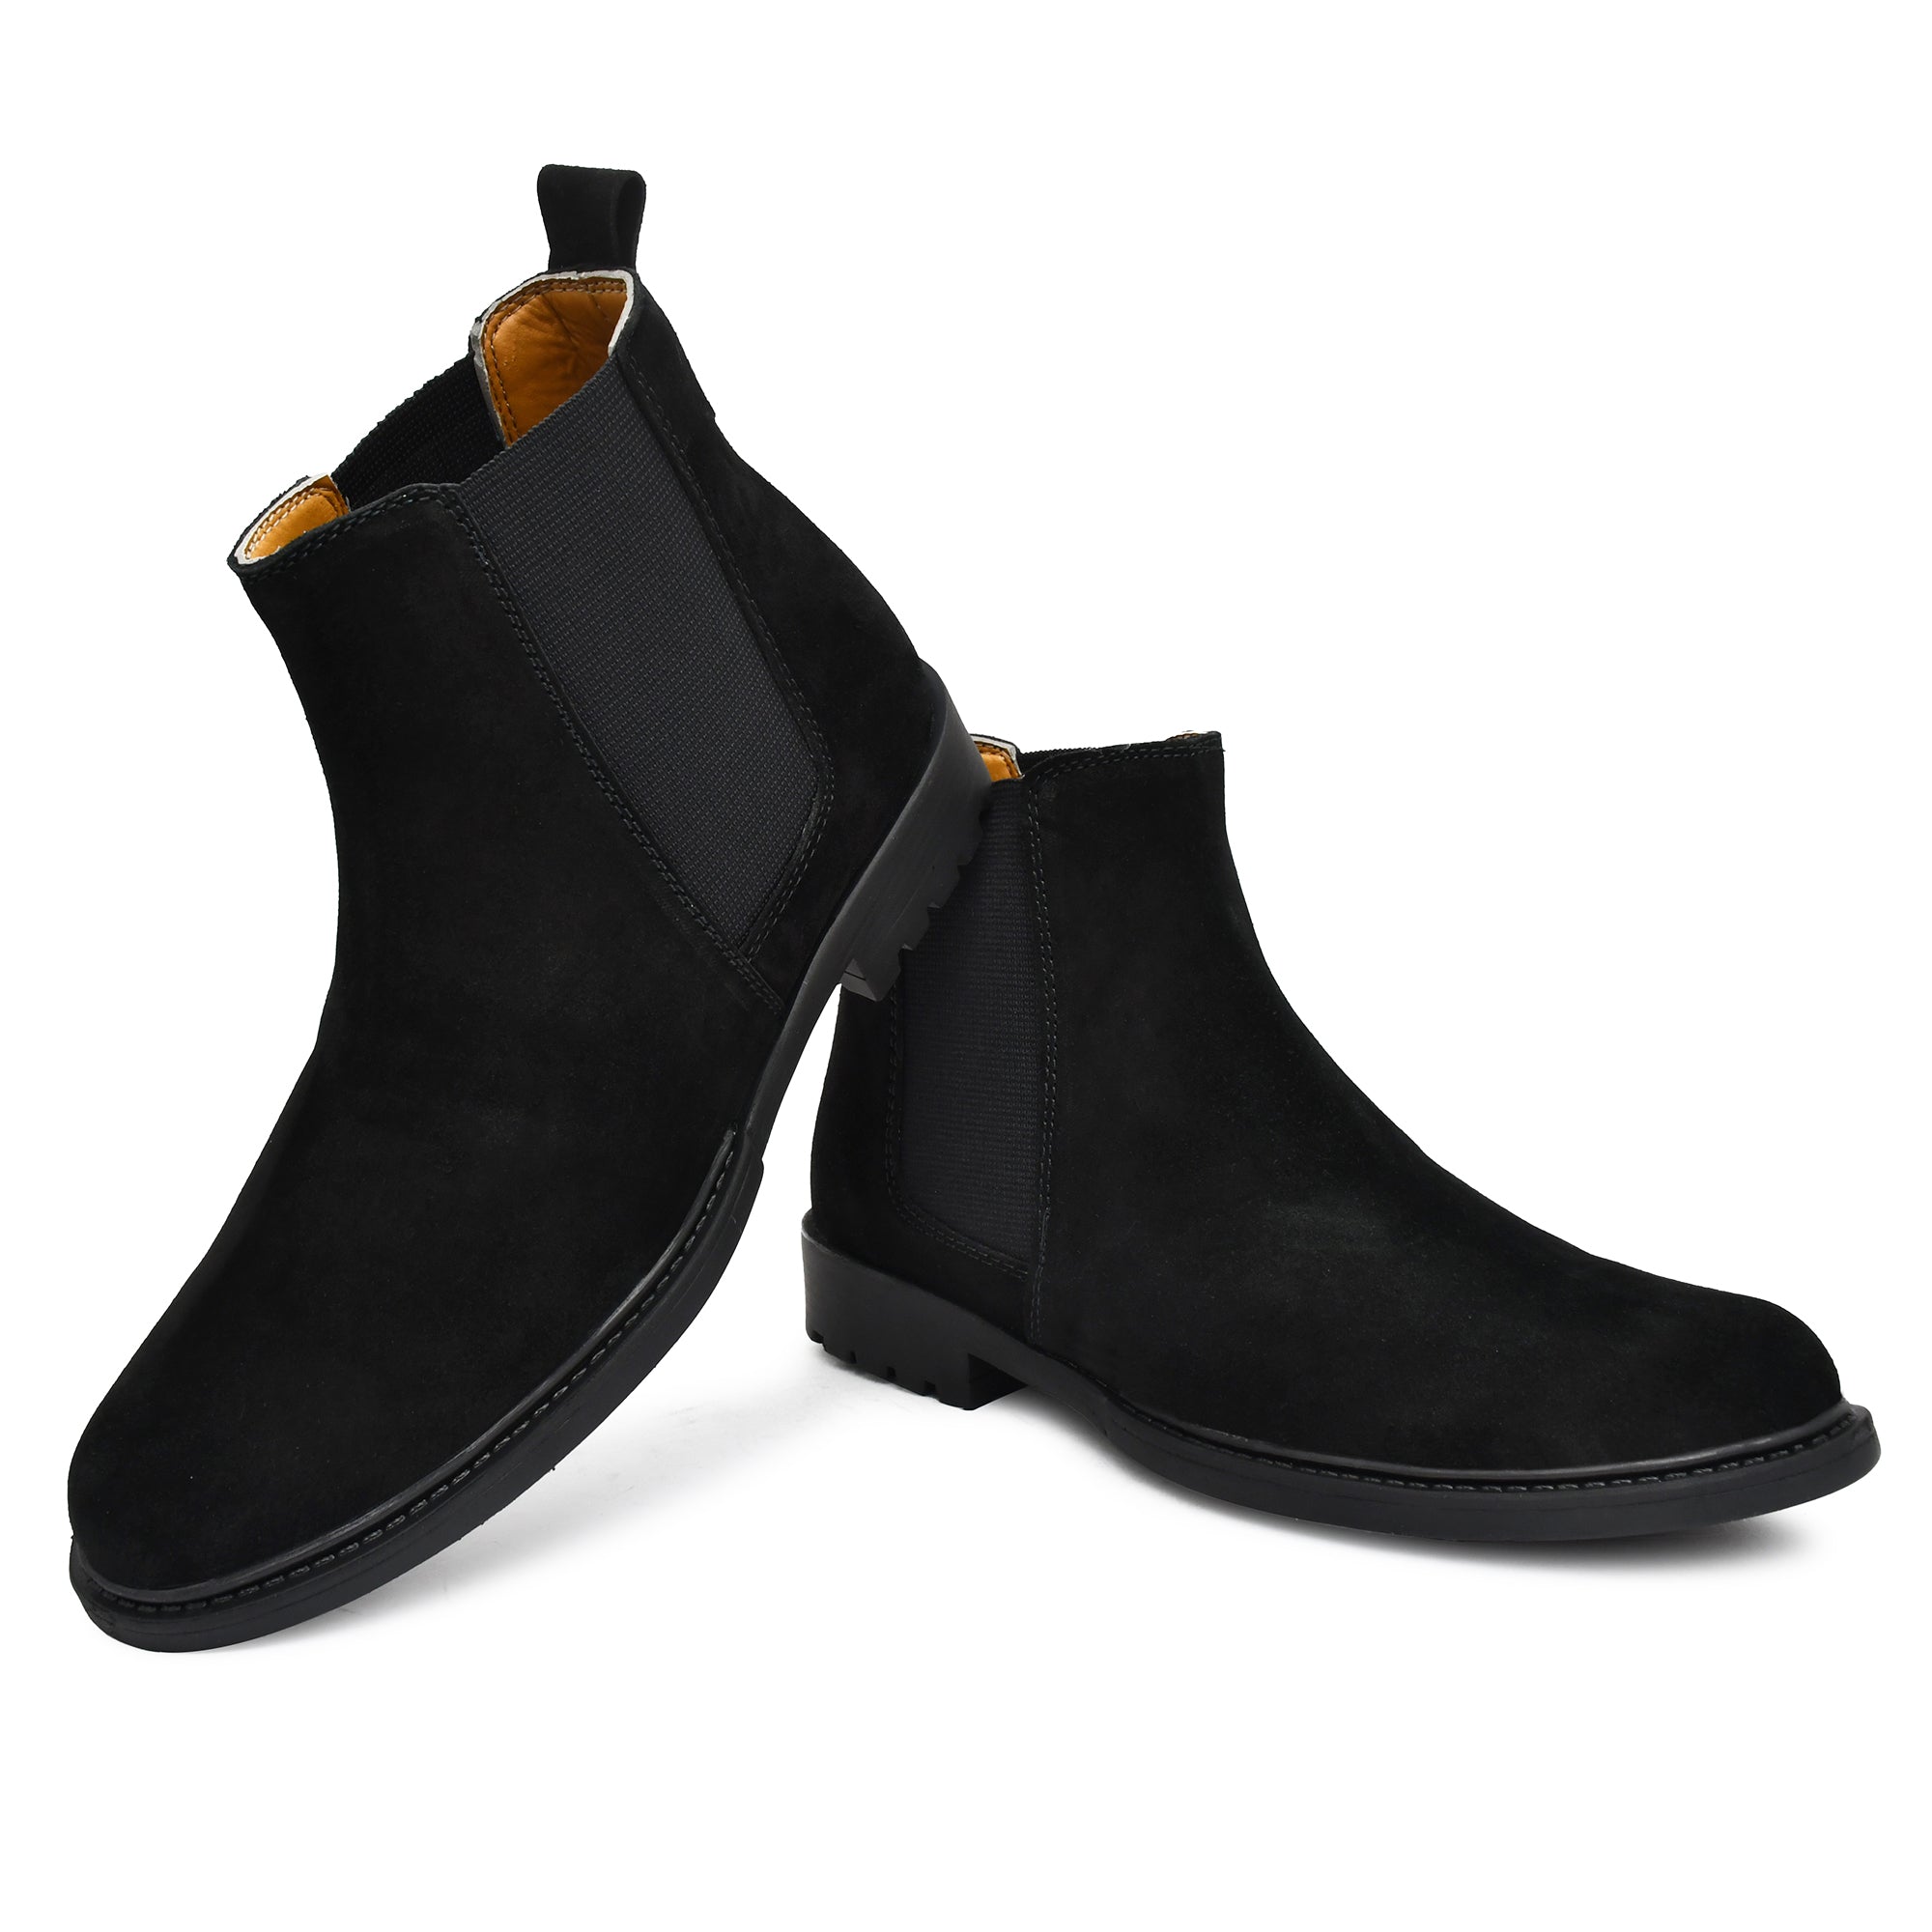 Sued Leather Boots for men's